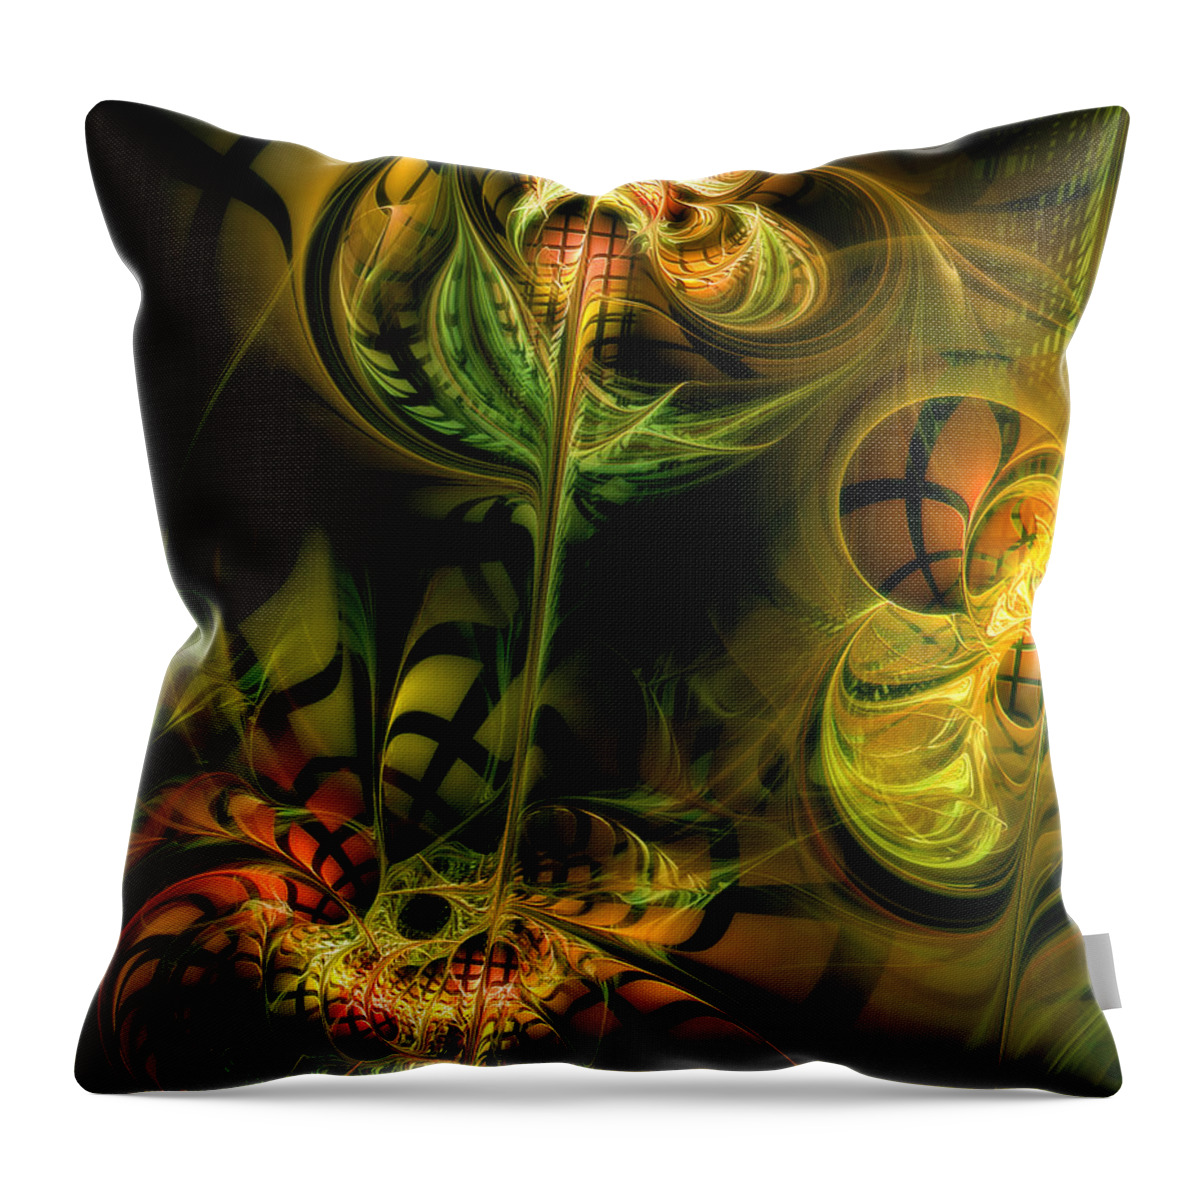 Abstract Throw Pillow featuring the digital art Food for Thought by Casey Kotas